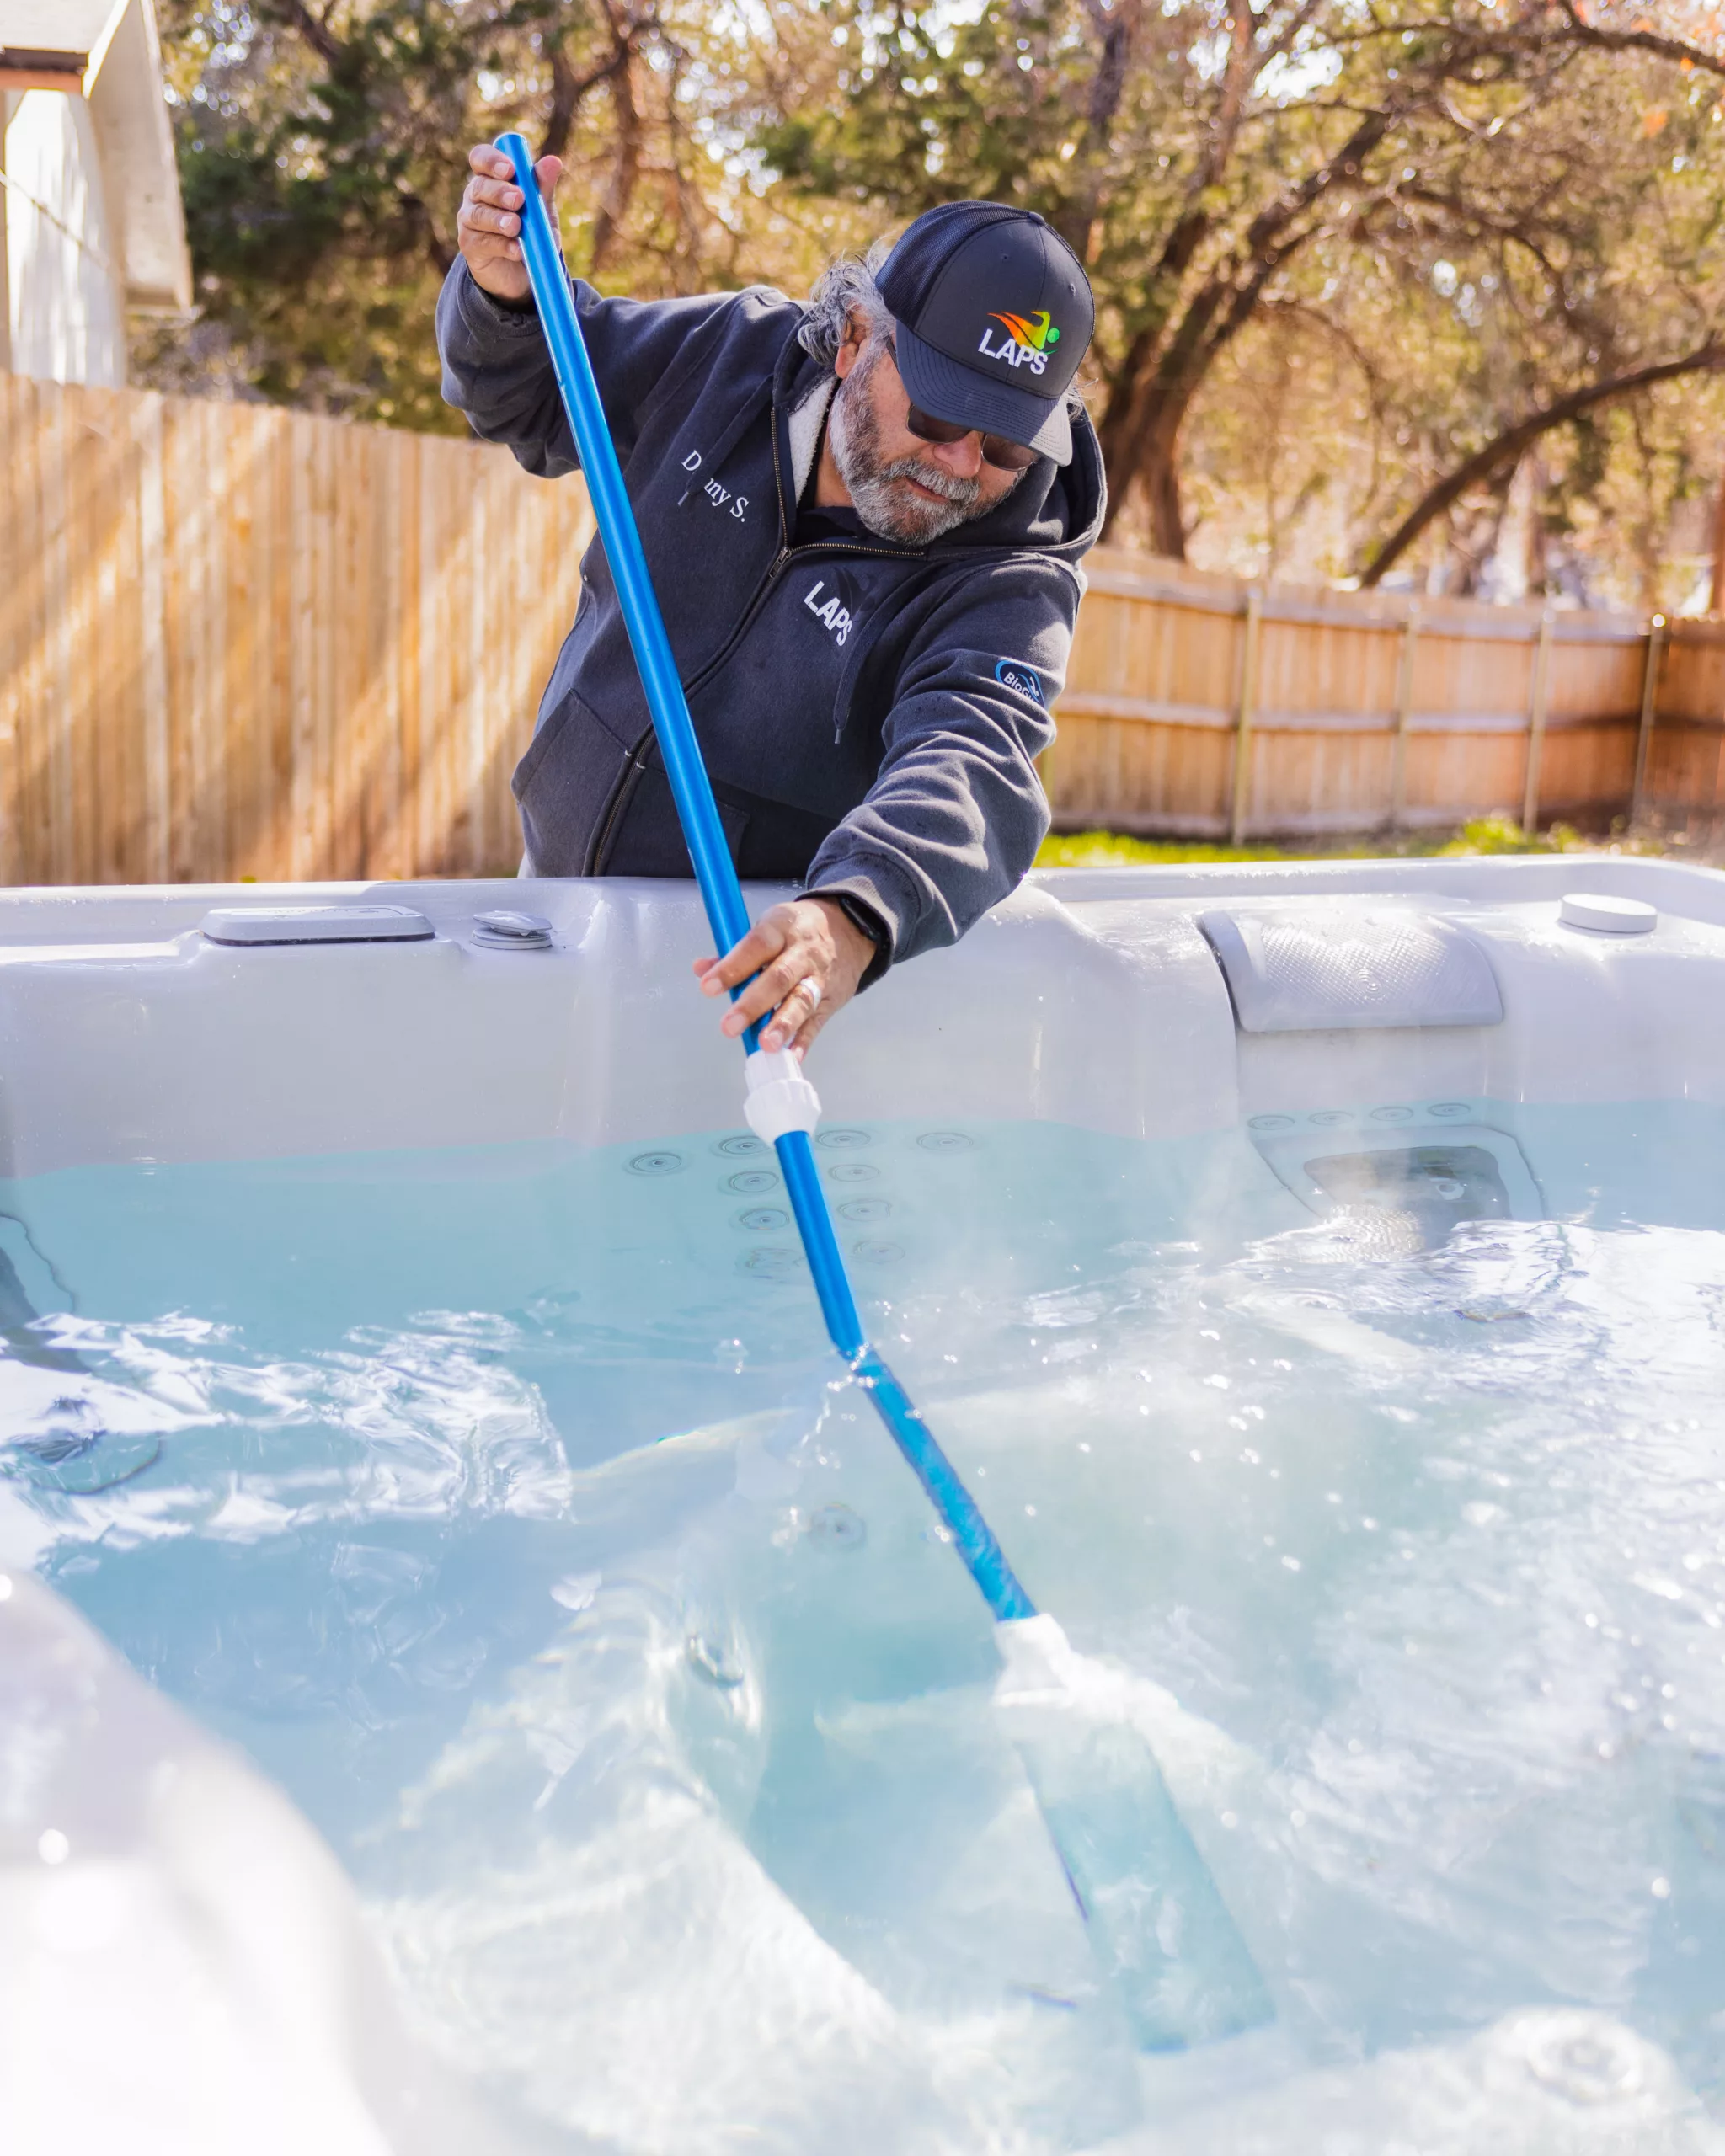 spa service technician cleaning hot tub